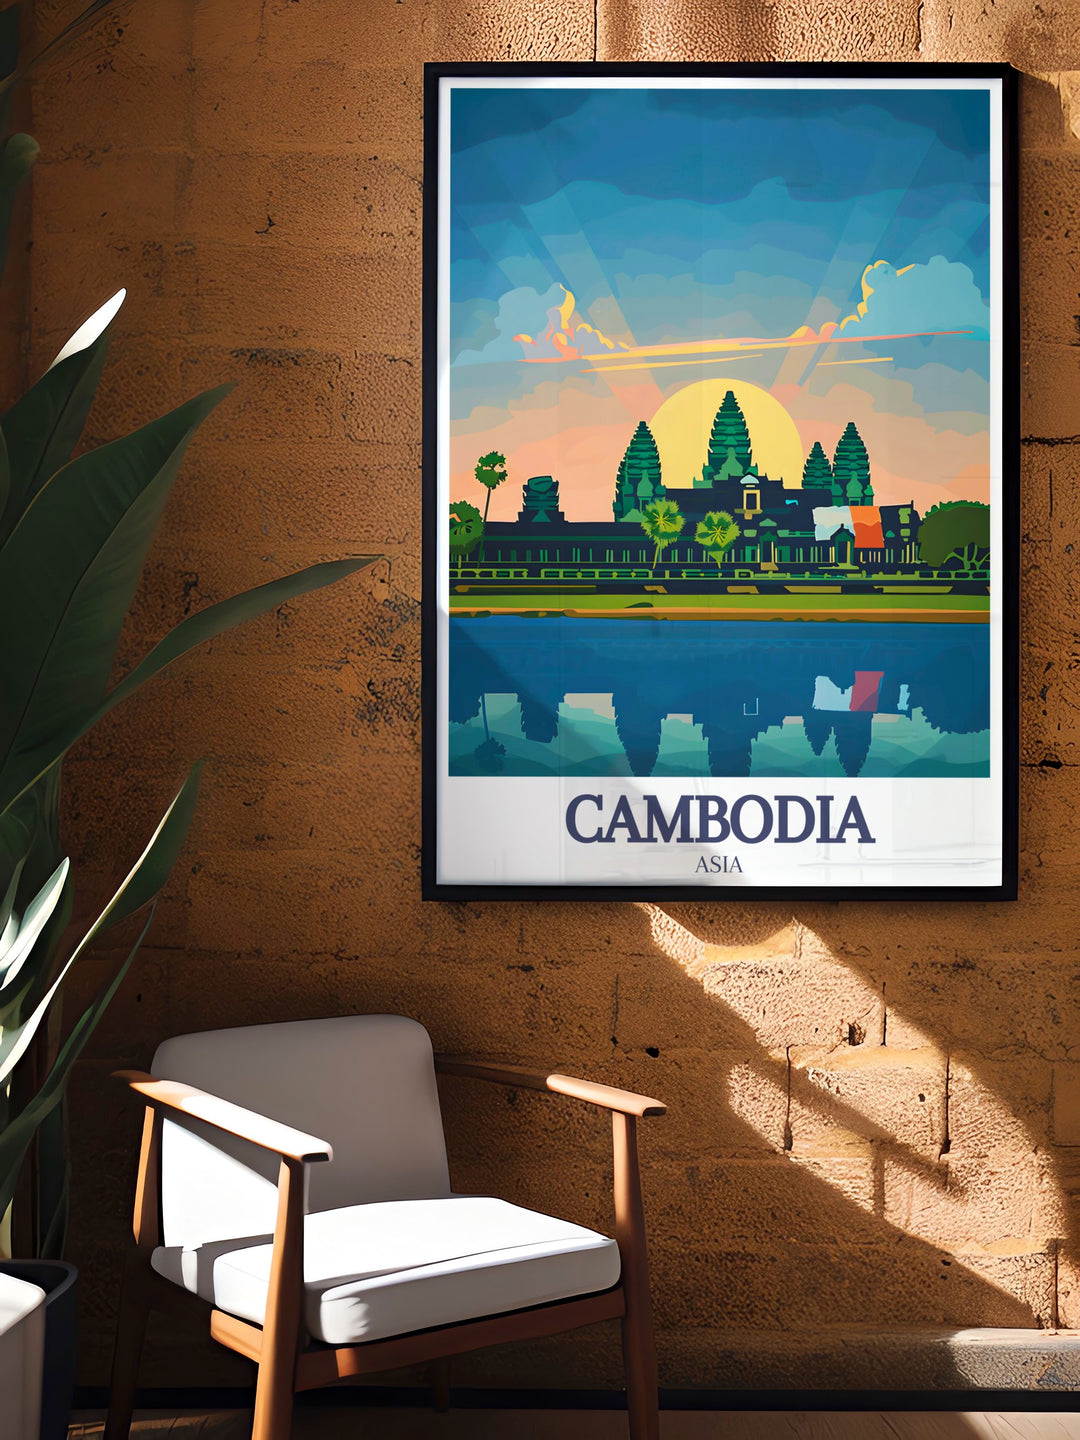 Bring the splendor of Angkor Wat Khmer architecture into your home with this beautiful poster. Showcasing the famous temple in Cambodia, this piece is ideal for highlighting the rich cultural heritage and historical significance of the Khmer Empire.